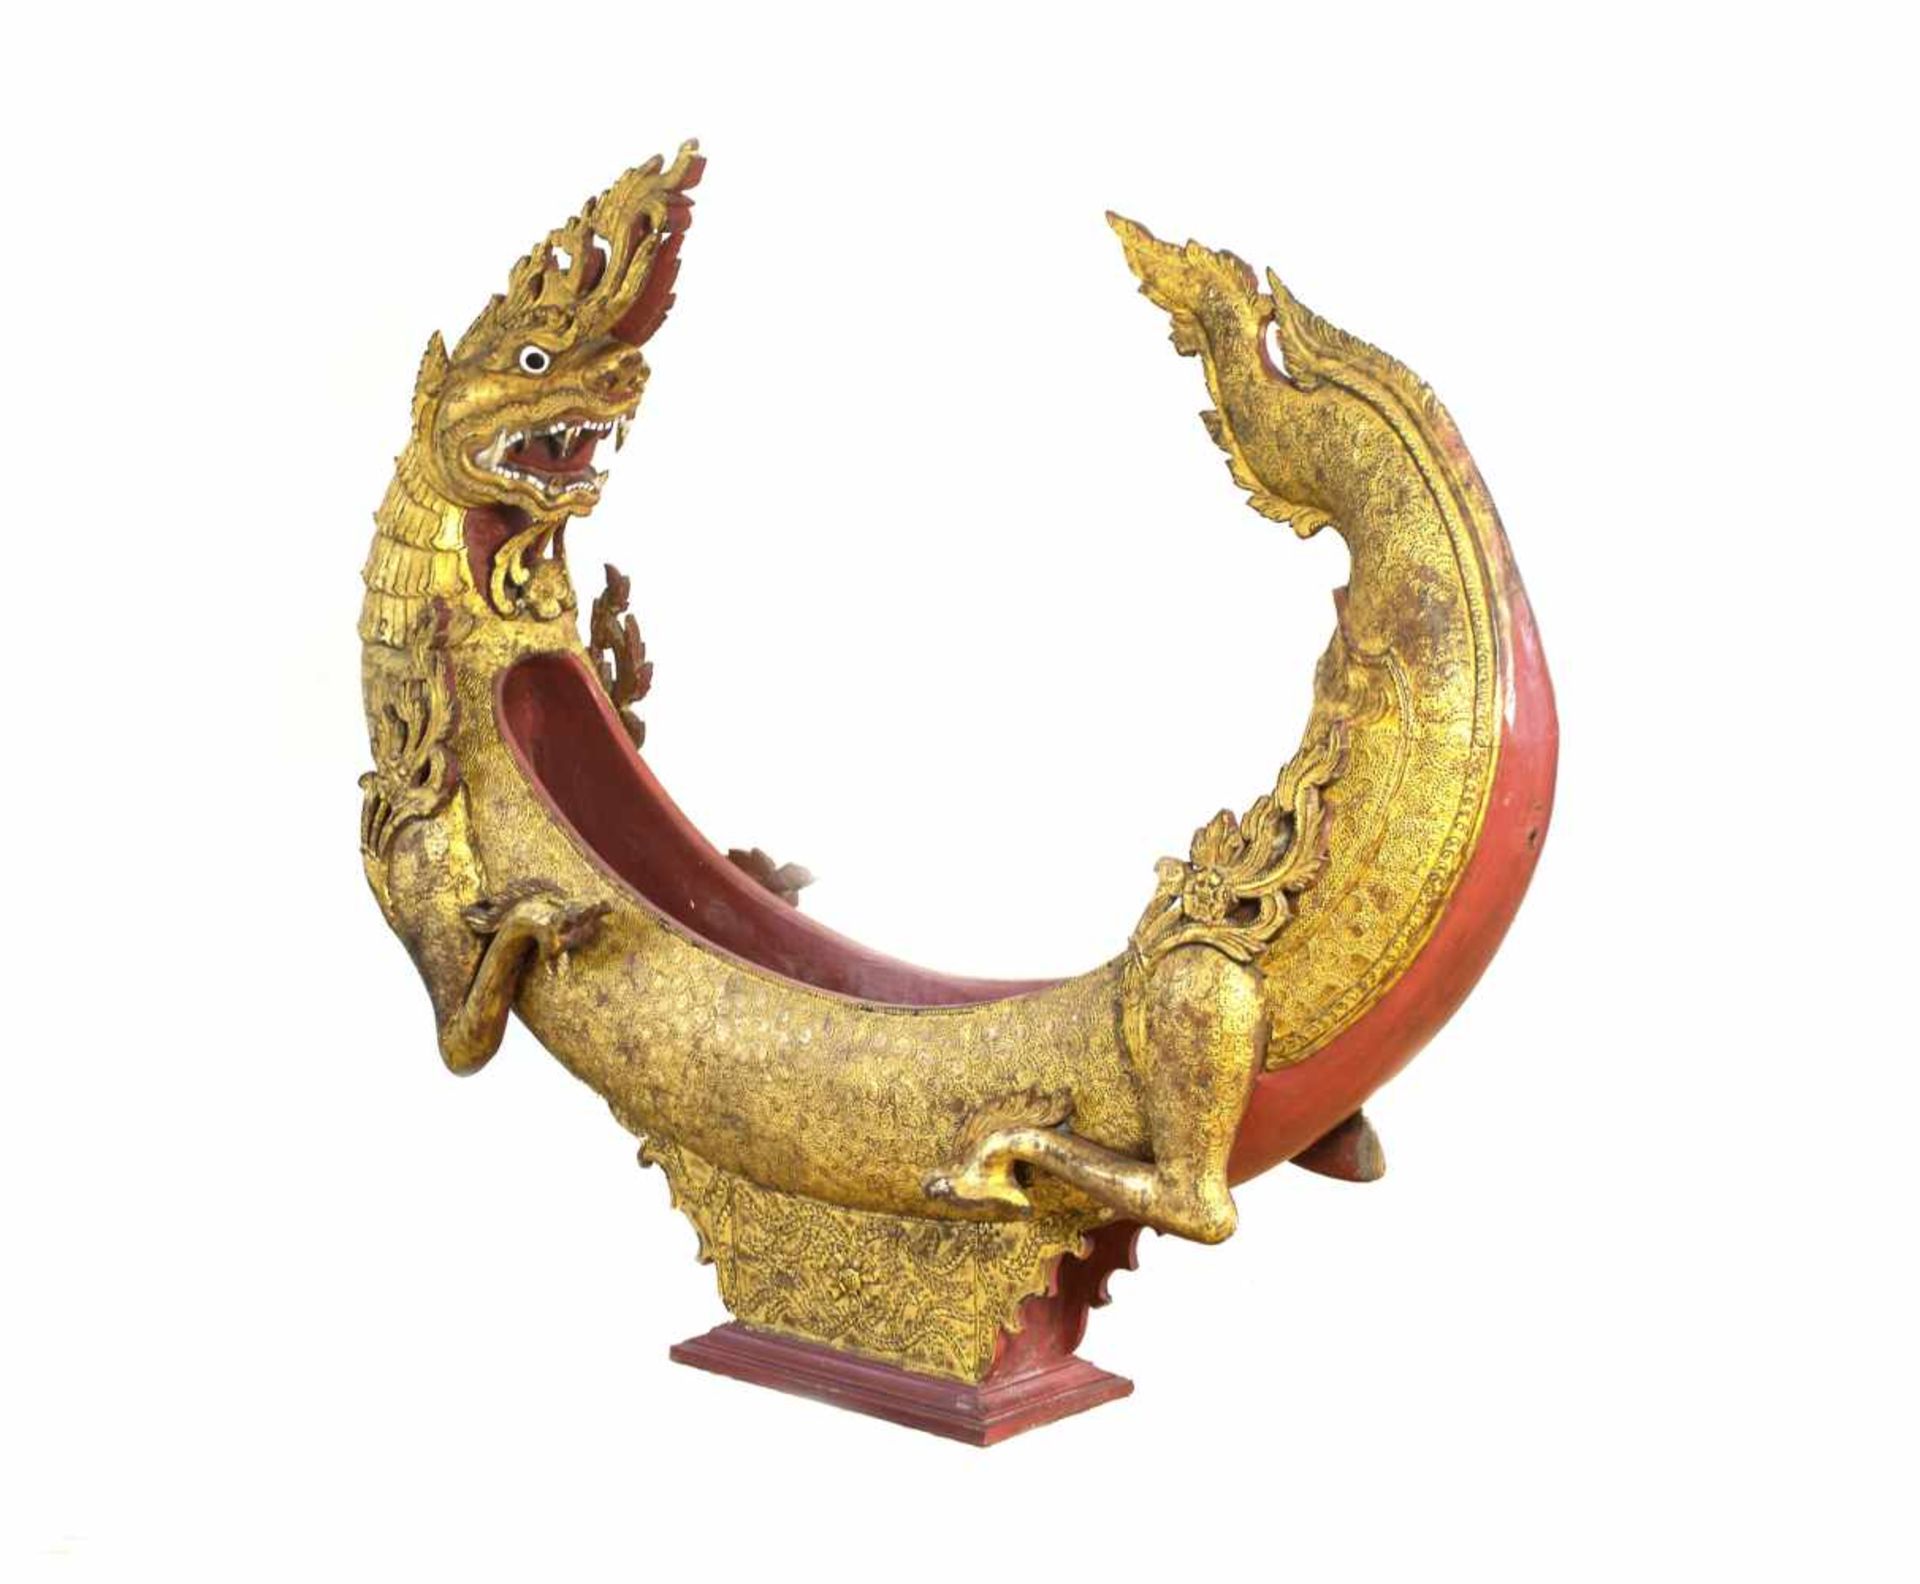 Naga in the form of a sound box or incense burner